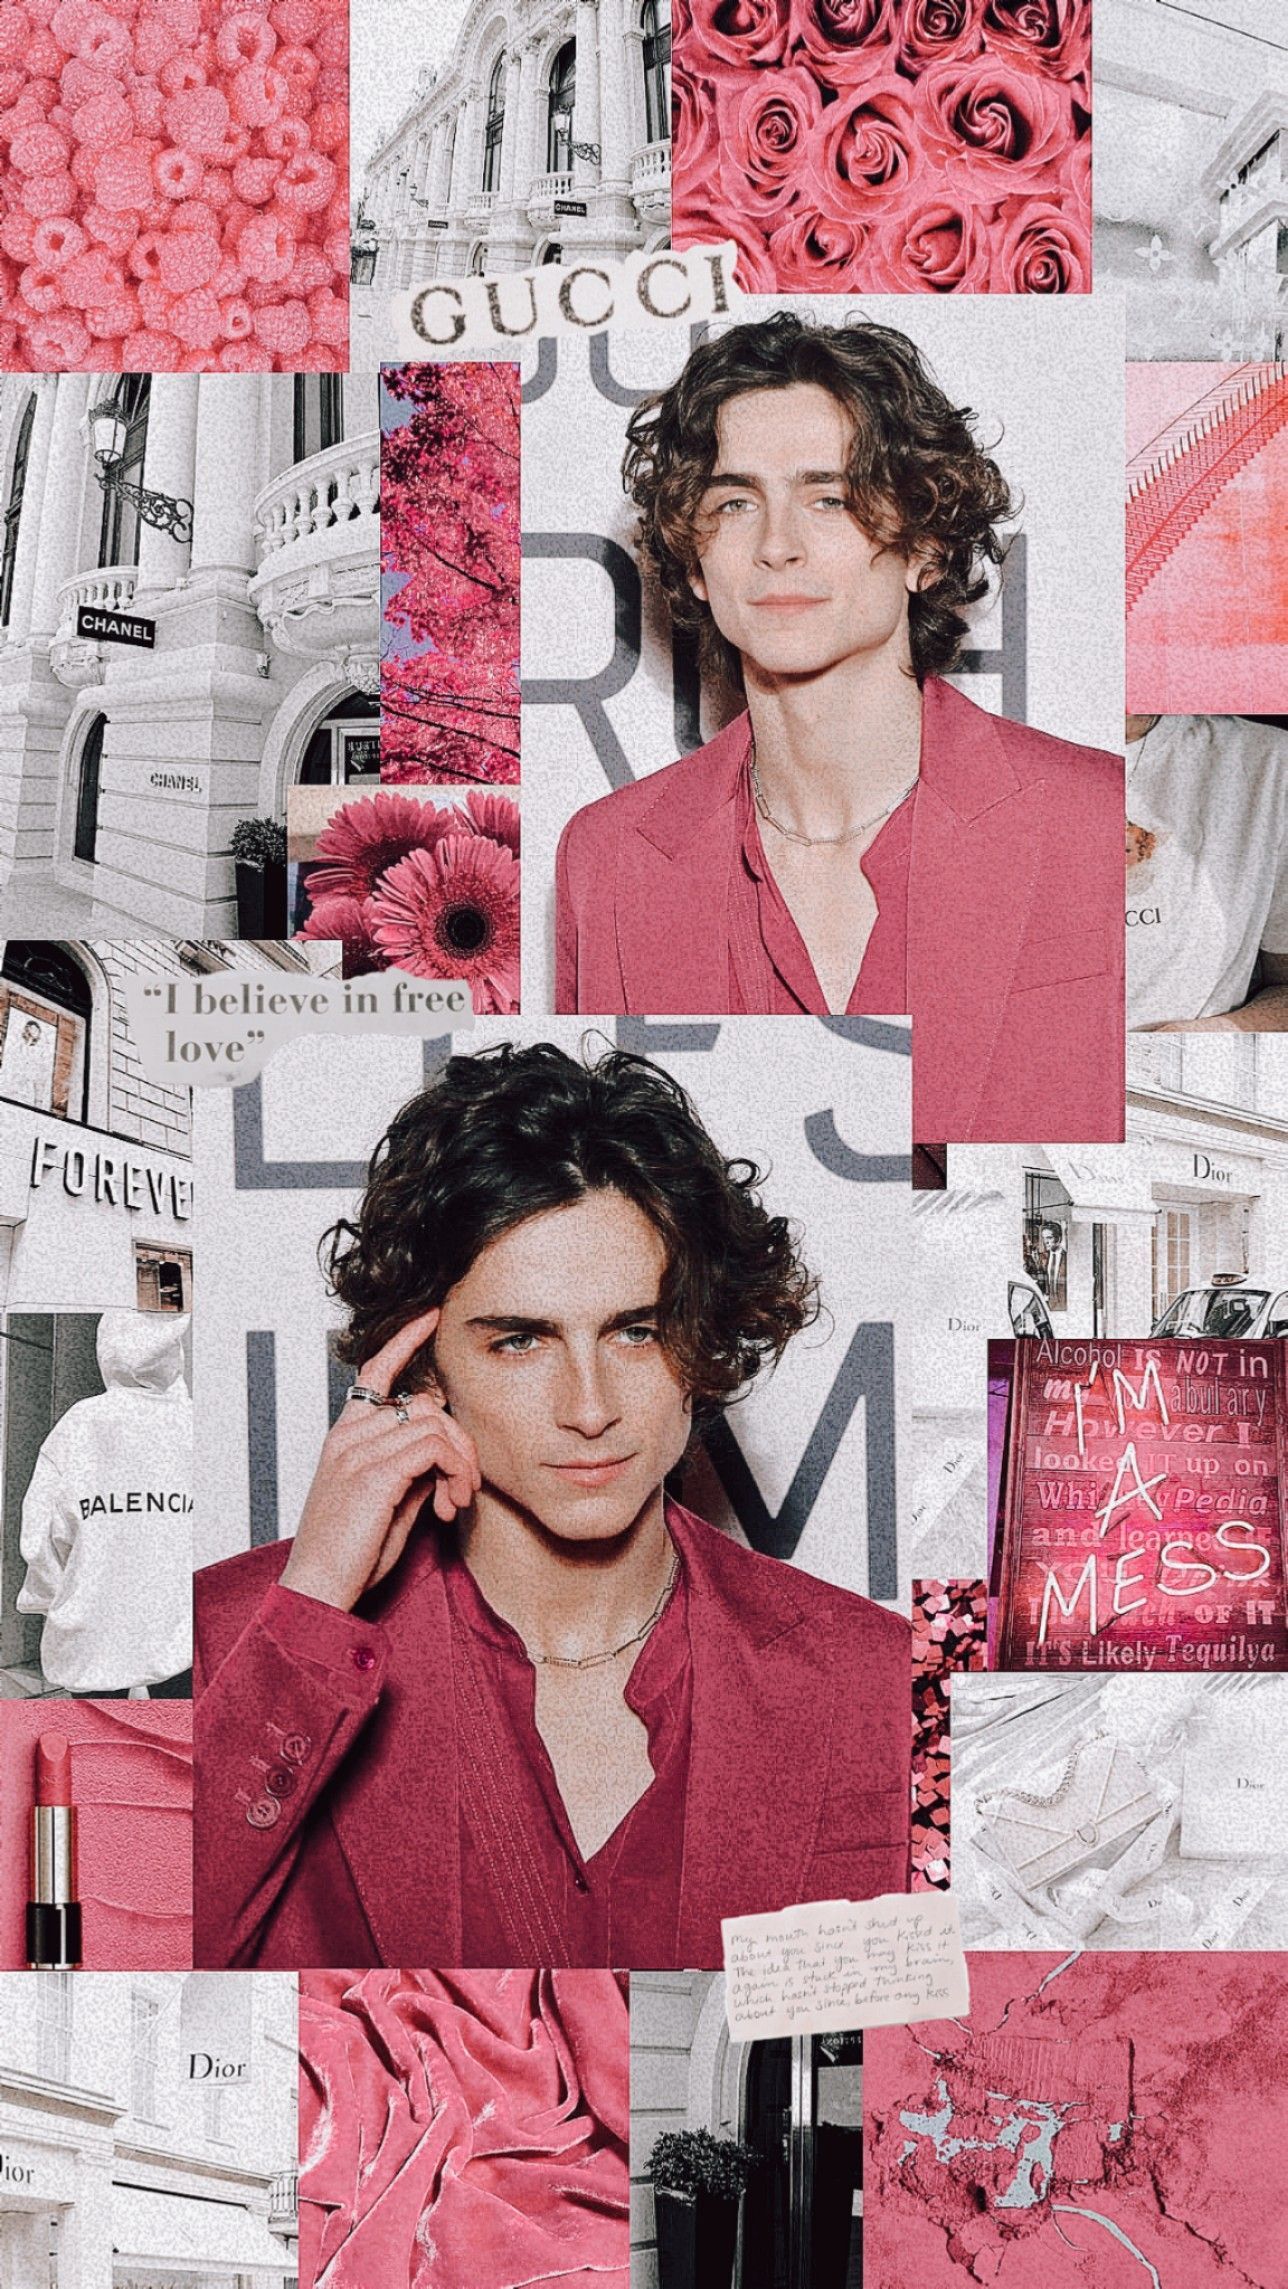 Aesthetic collage of Timothee Chalamet in red suit and pink shirt - Timothee Chalamet